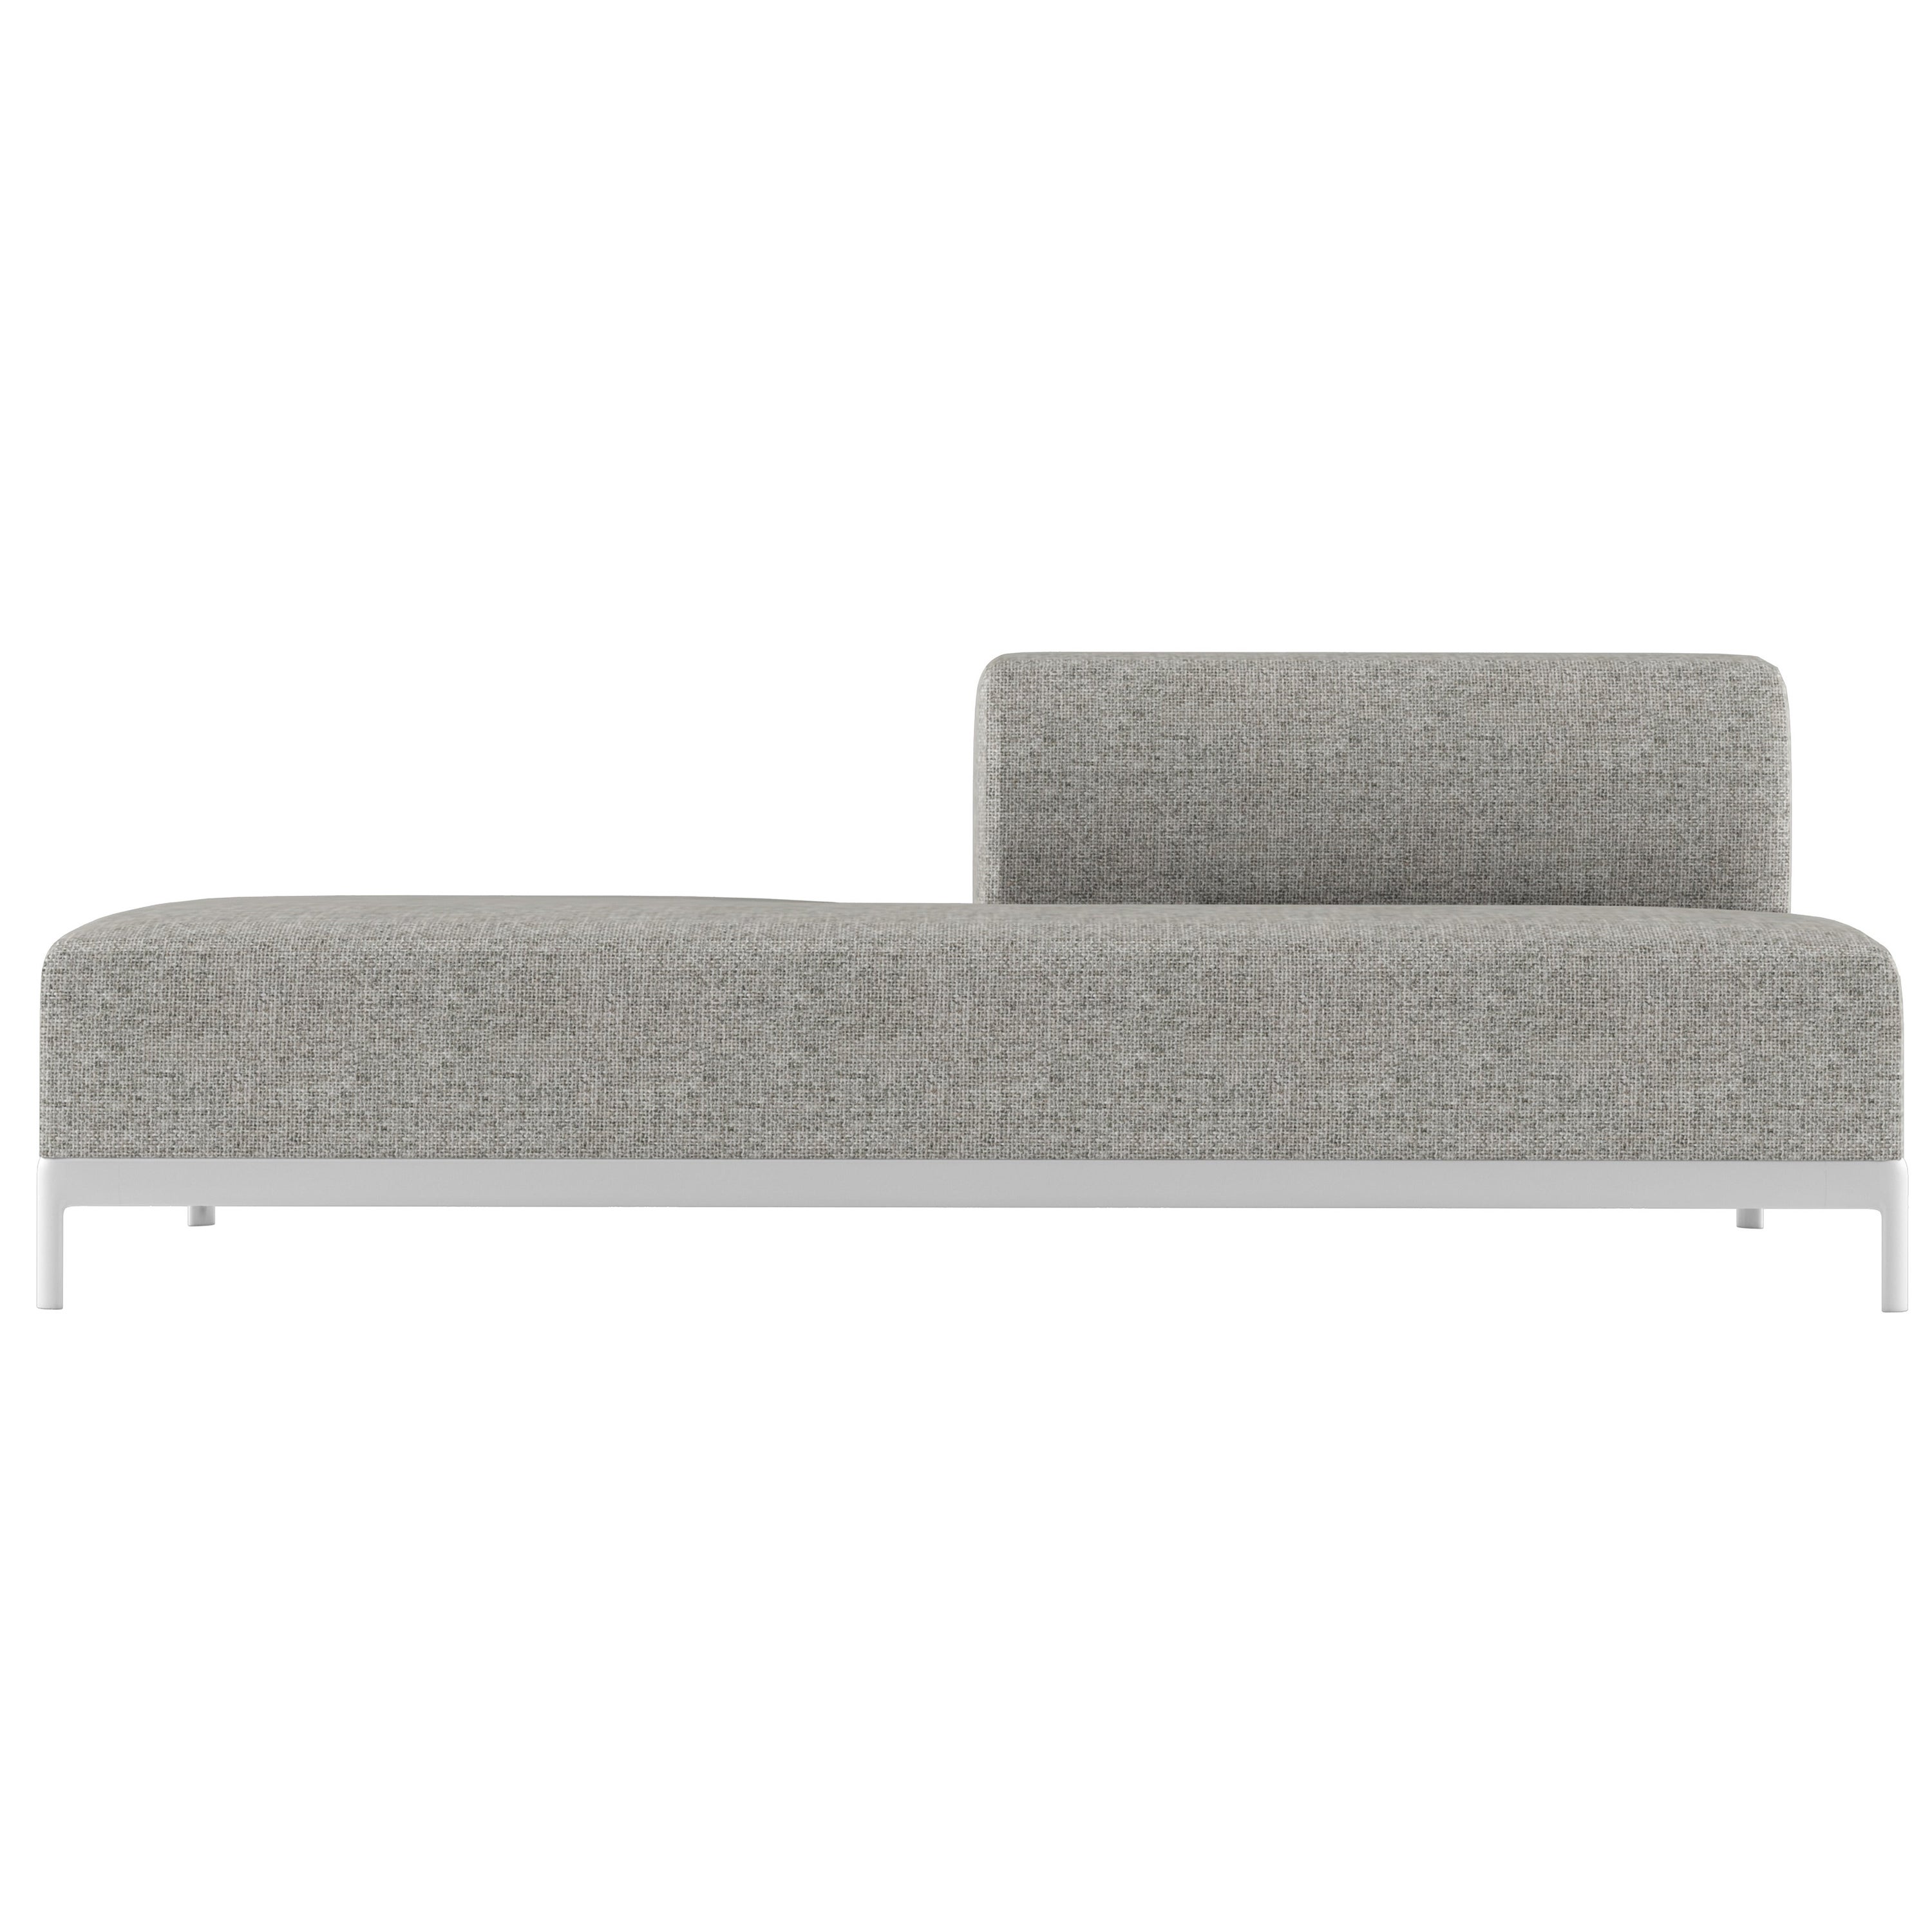 Alias P66 AluZen Soft Ending Sofa Outdoor SX in Upholstery with Aluminium Frame For Sale